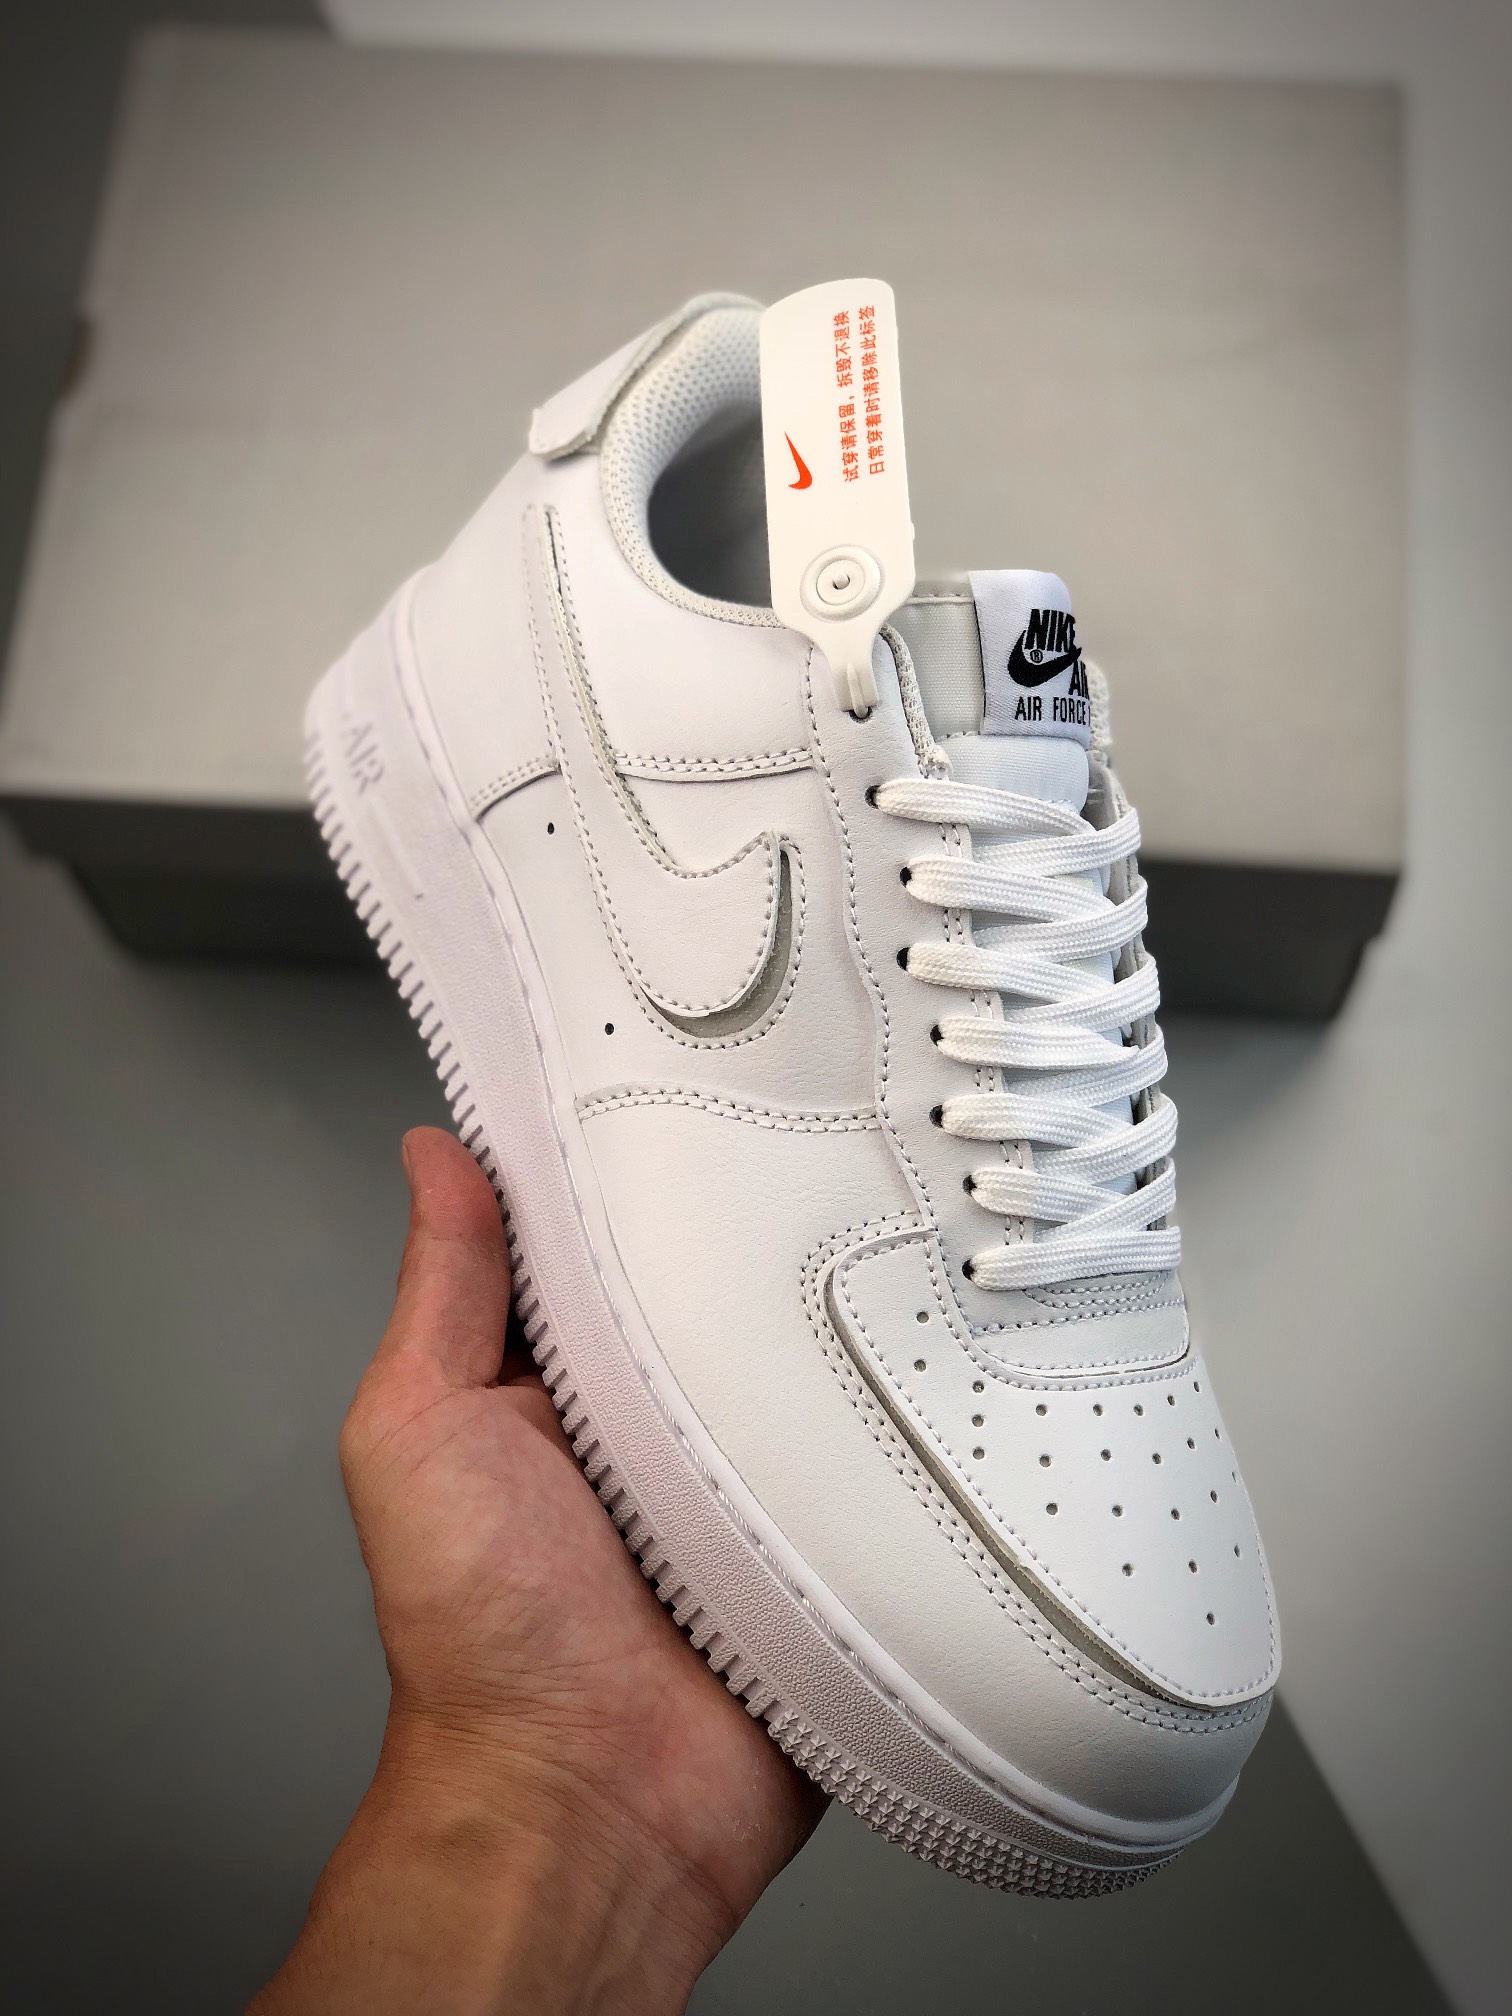 Nike Air AF Force 1 Low Triple White DB2812-100 Shoes